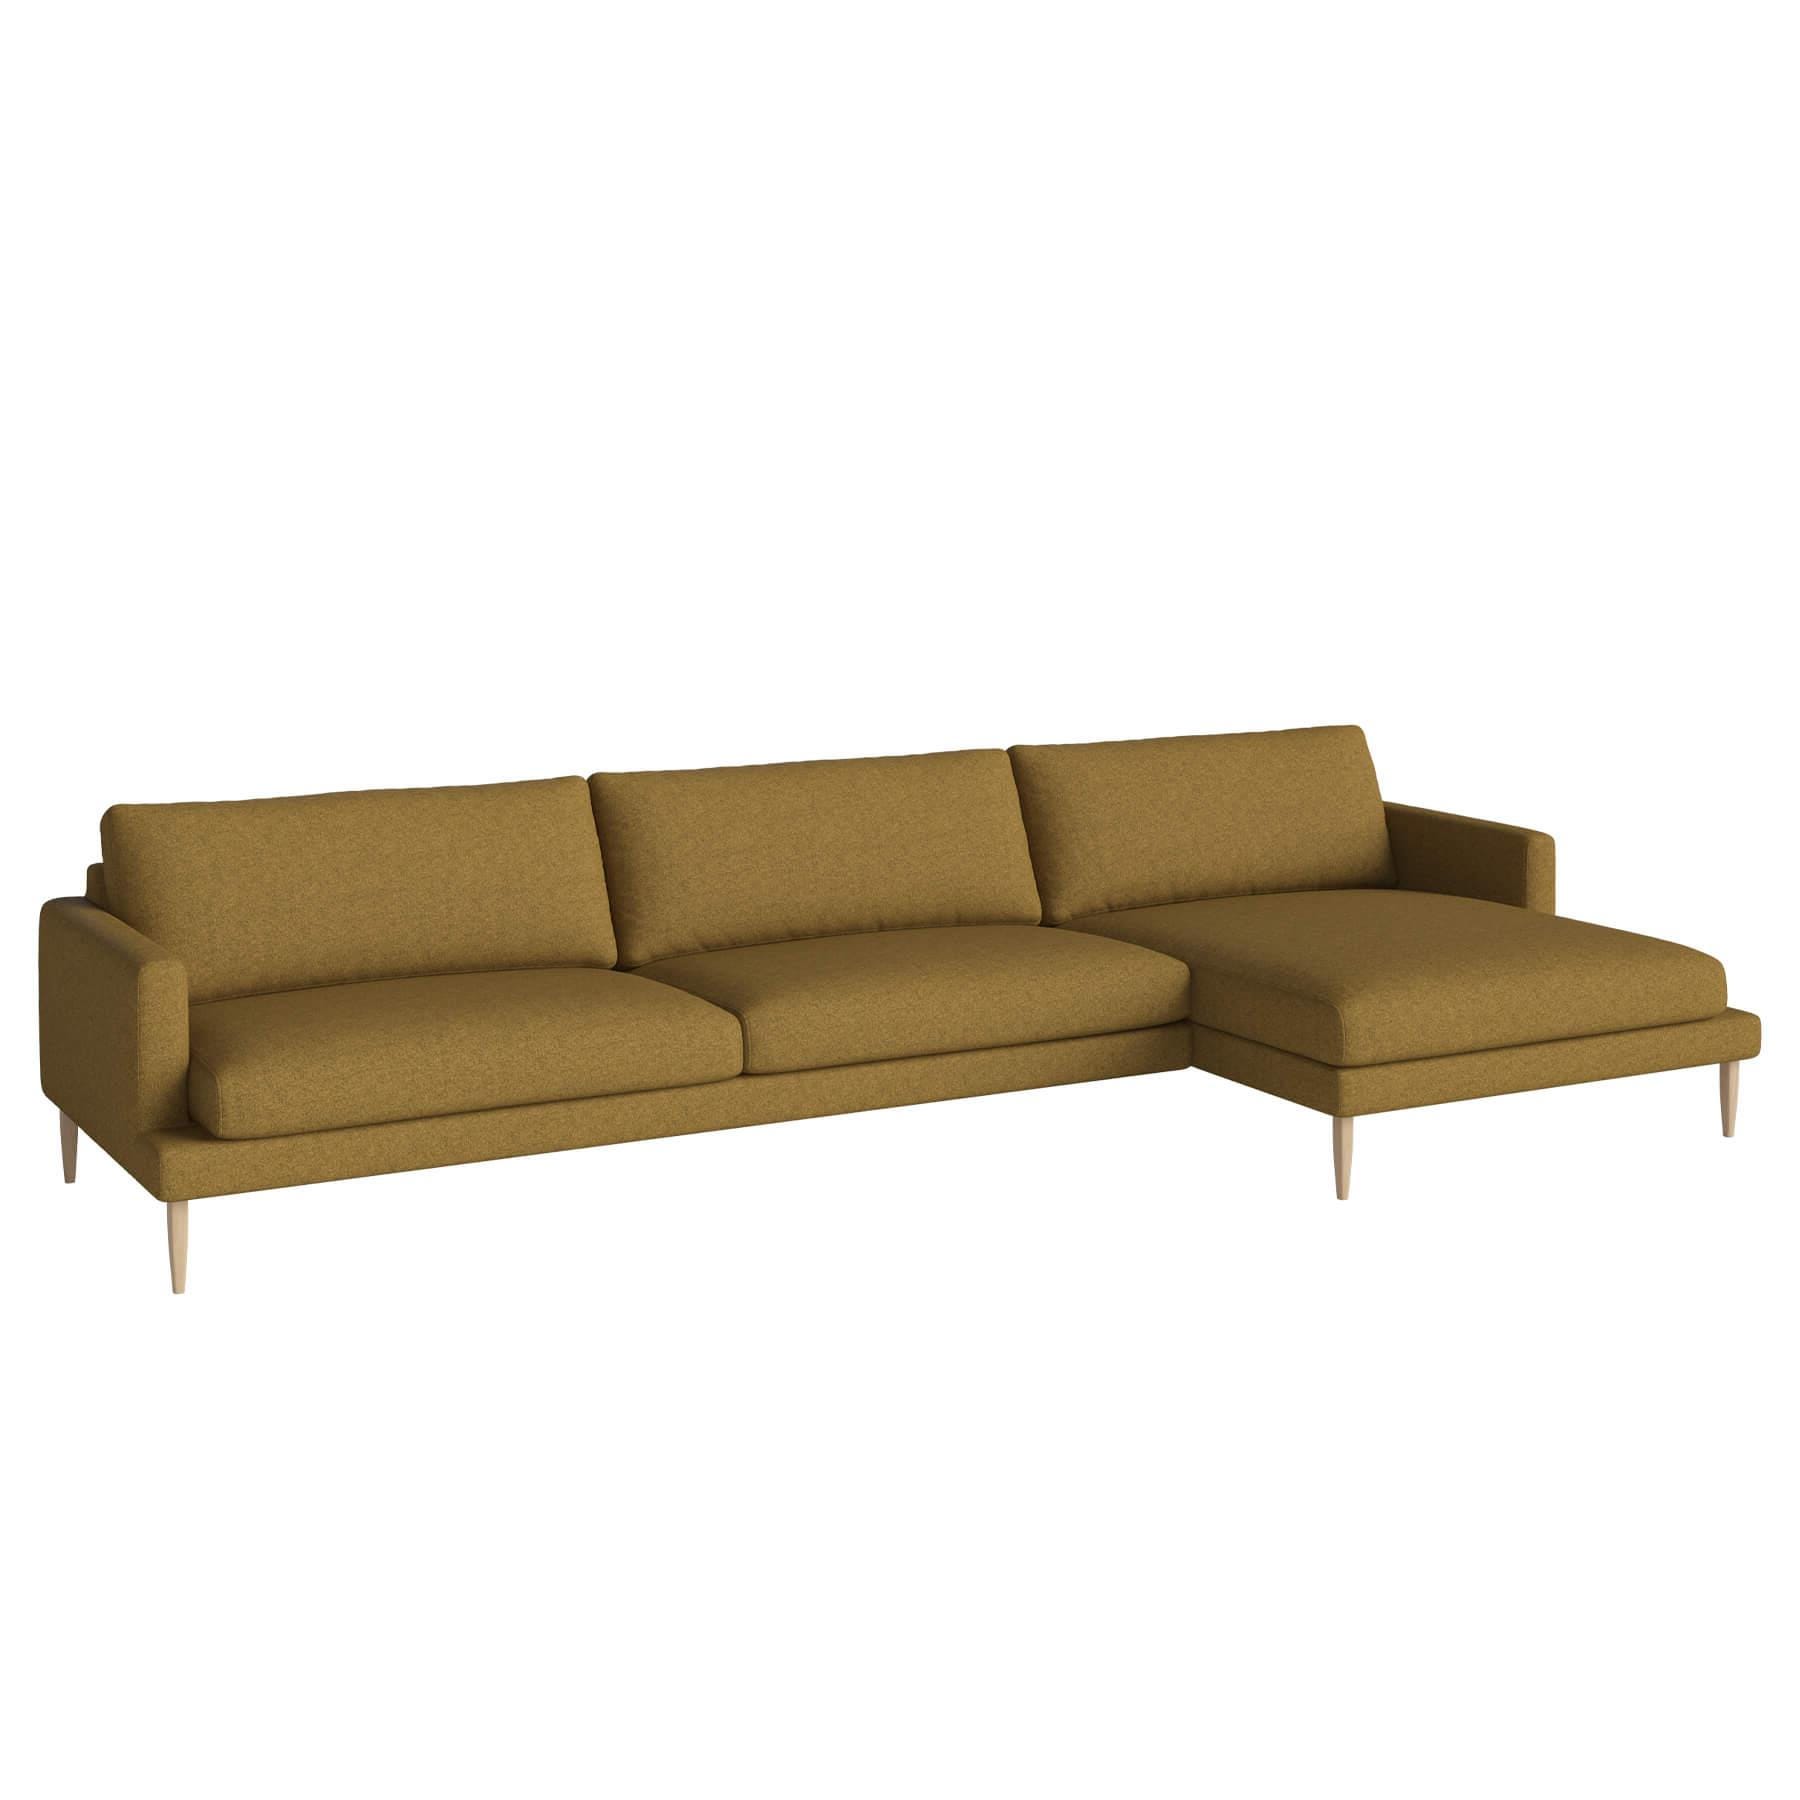 Bolia Veneda Sofa 45 Seater Sofa With Chaise Longue White Oiled Oak Qual Curry Right Brown Designer Furniture From Holloways Of Ludlow